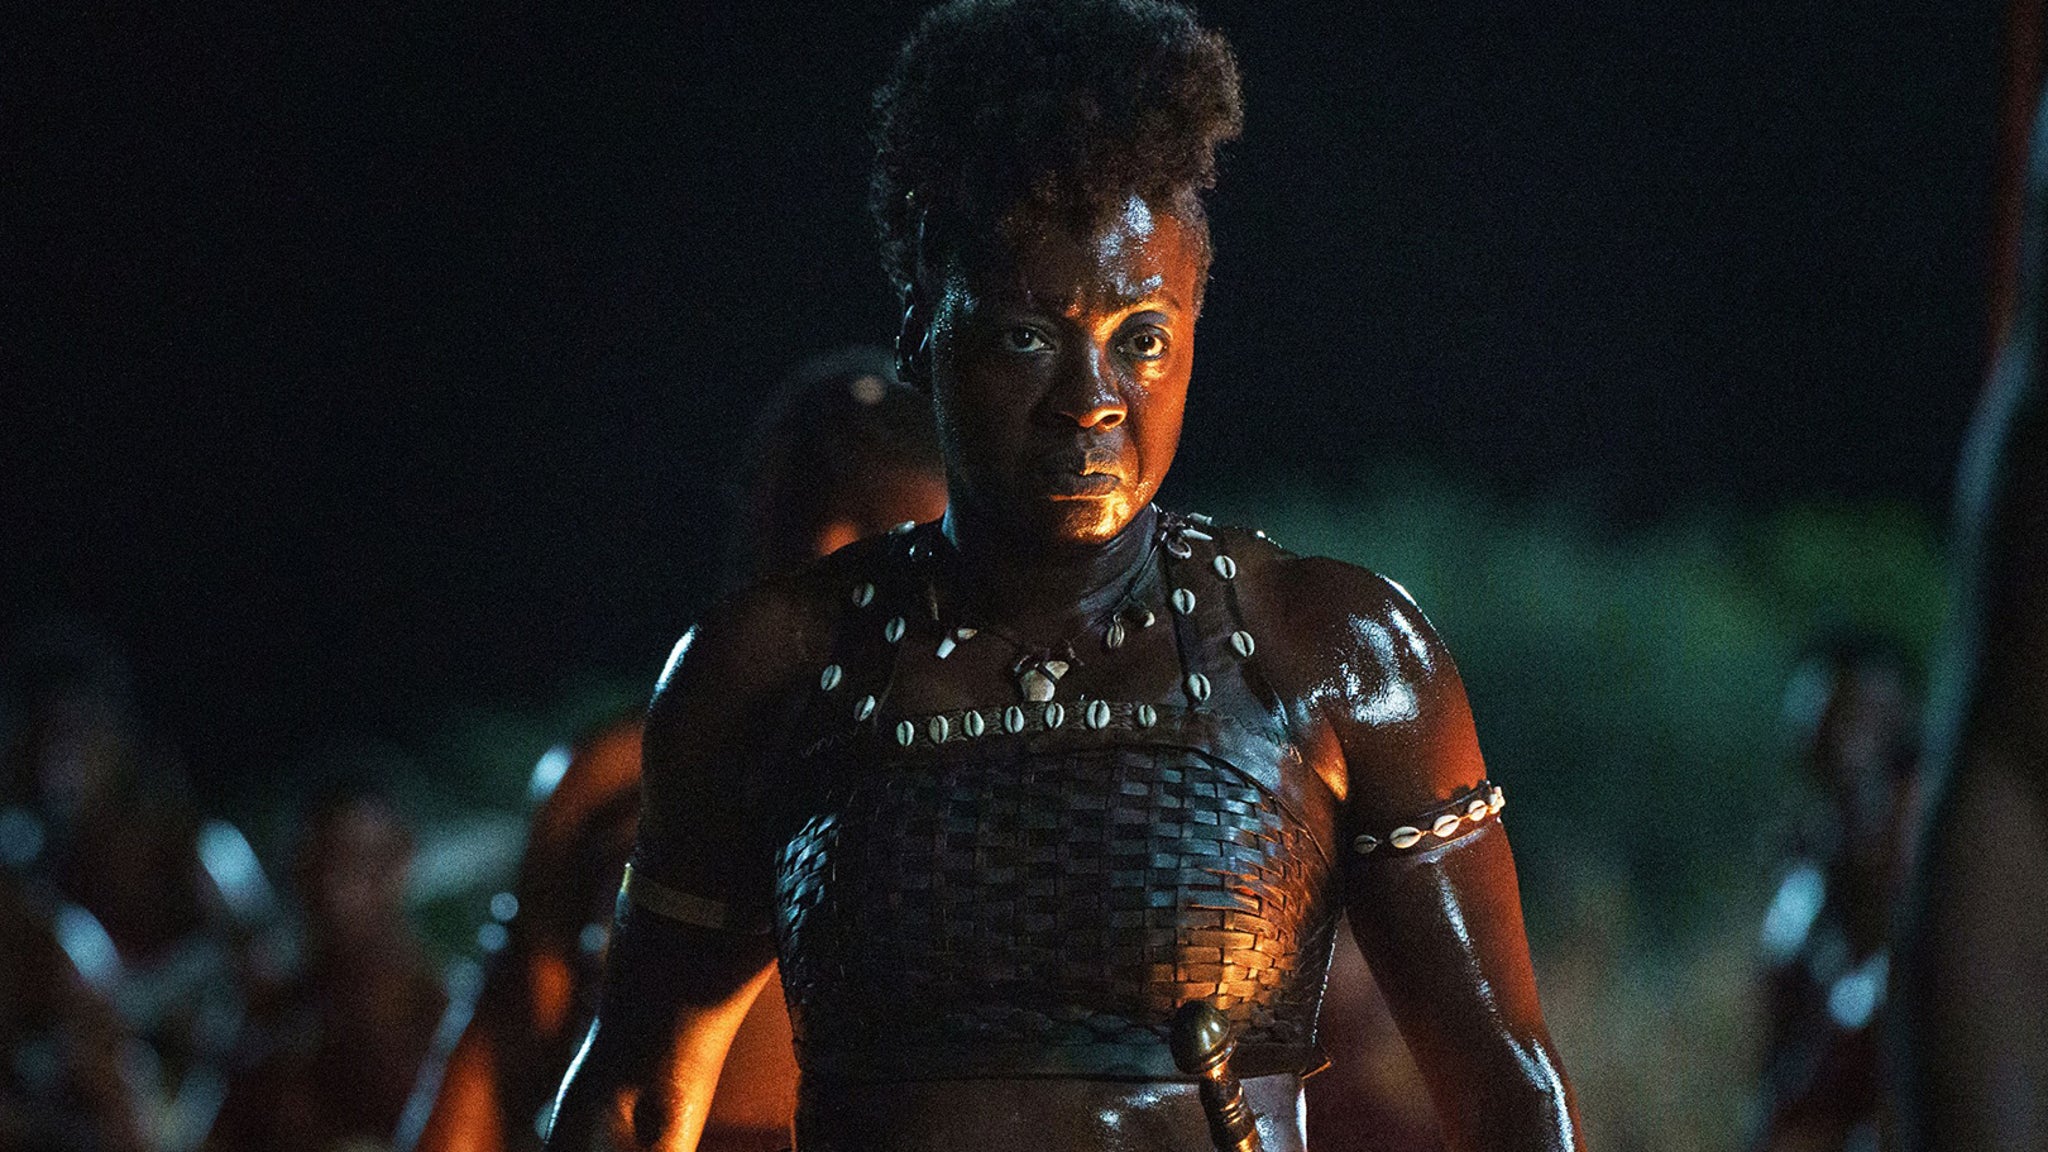 Viola Davis Says ‘The Woman King’ Training Gave Her ‘Huge Swagger’